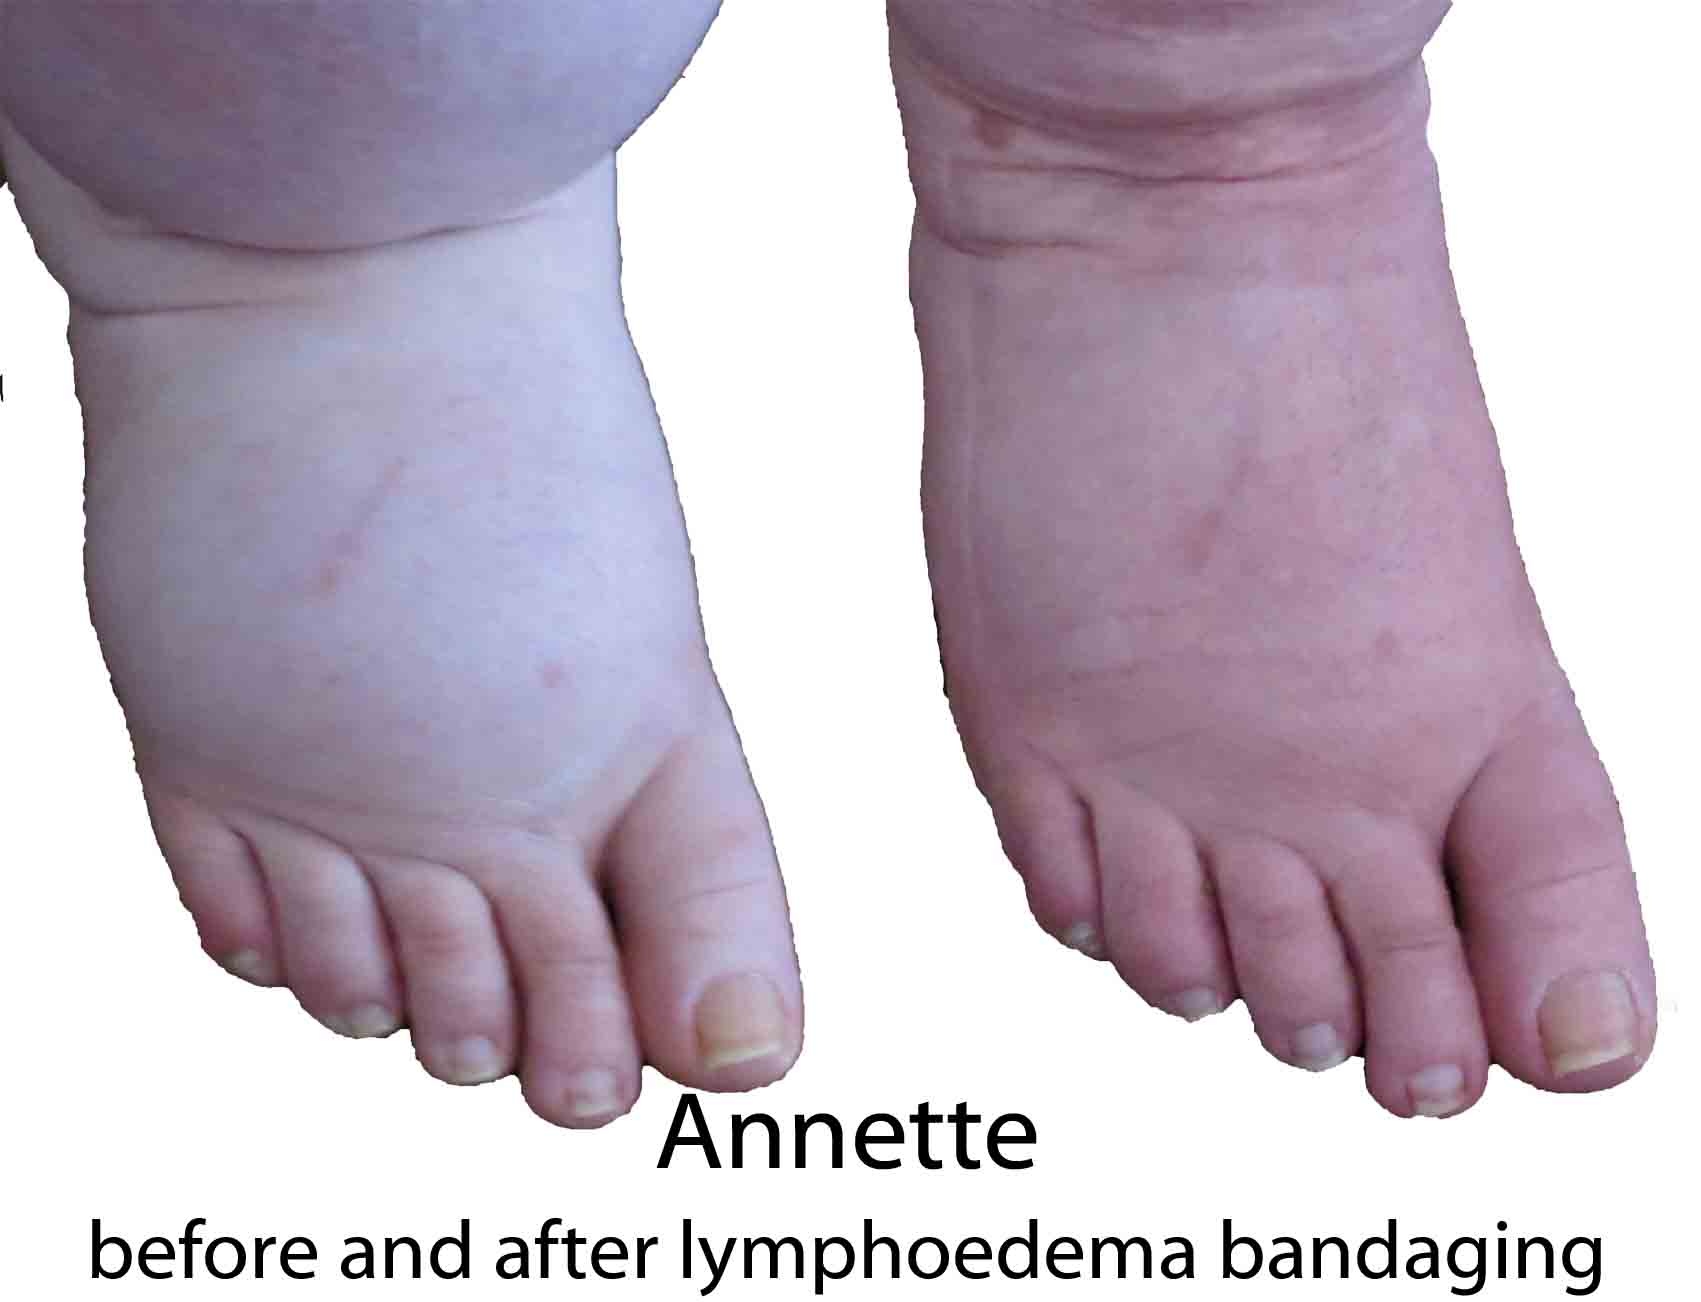 Annette before and after lymphoedema bandaging